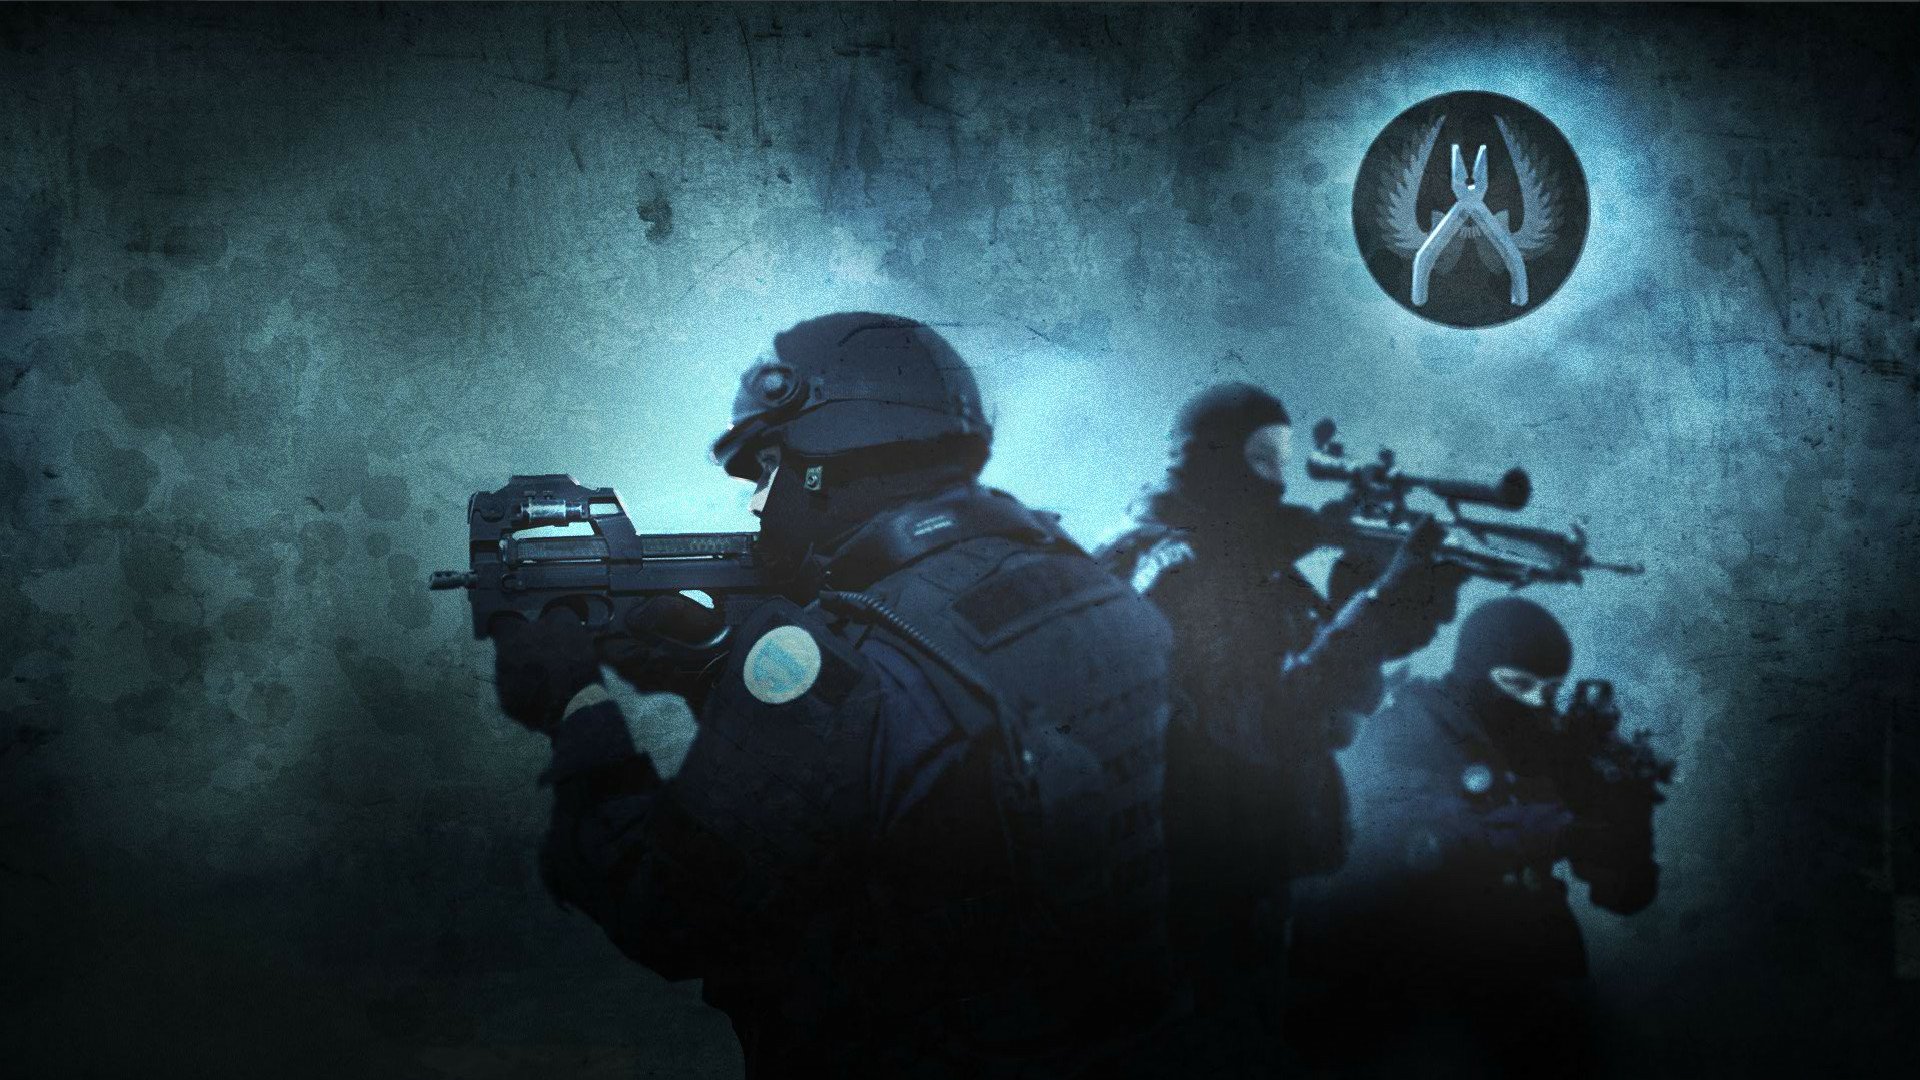 Counter-Strike: Global Offensive Live Wallpaper